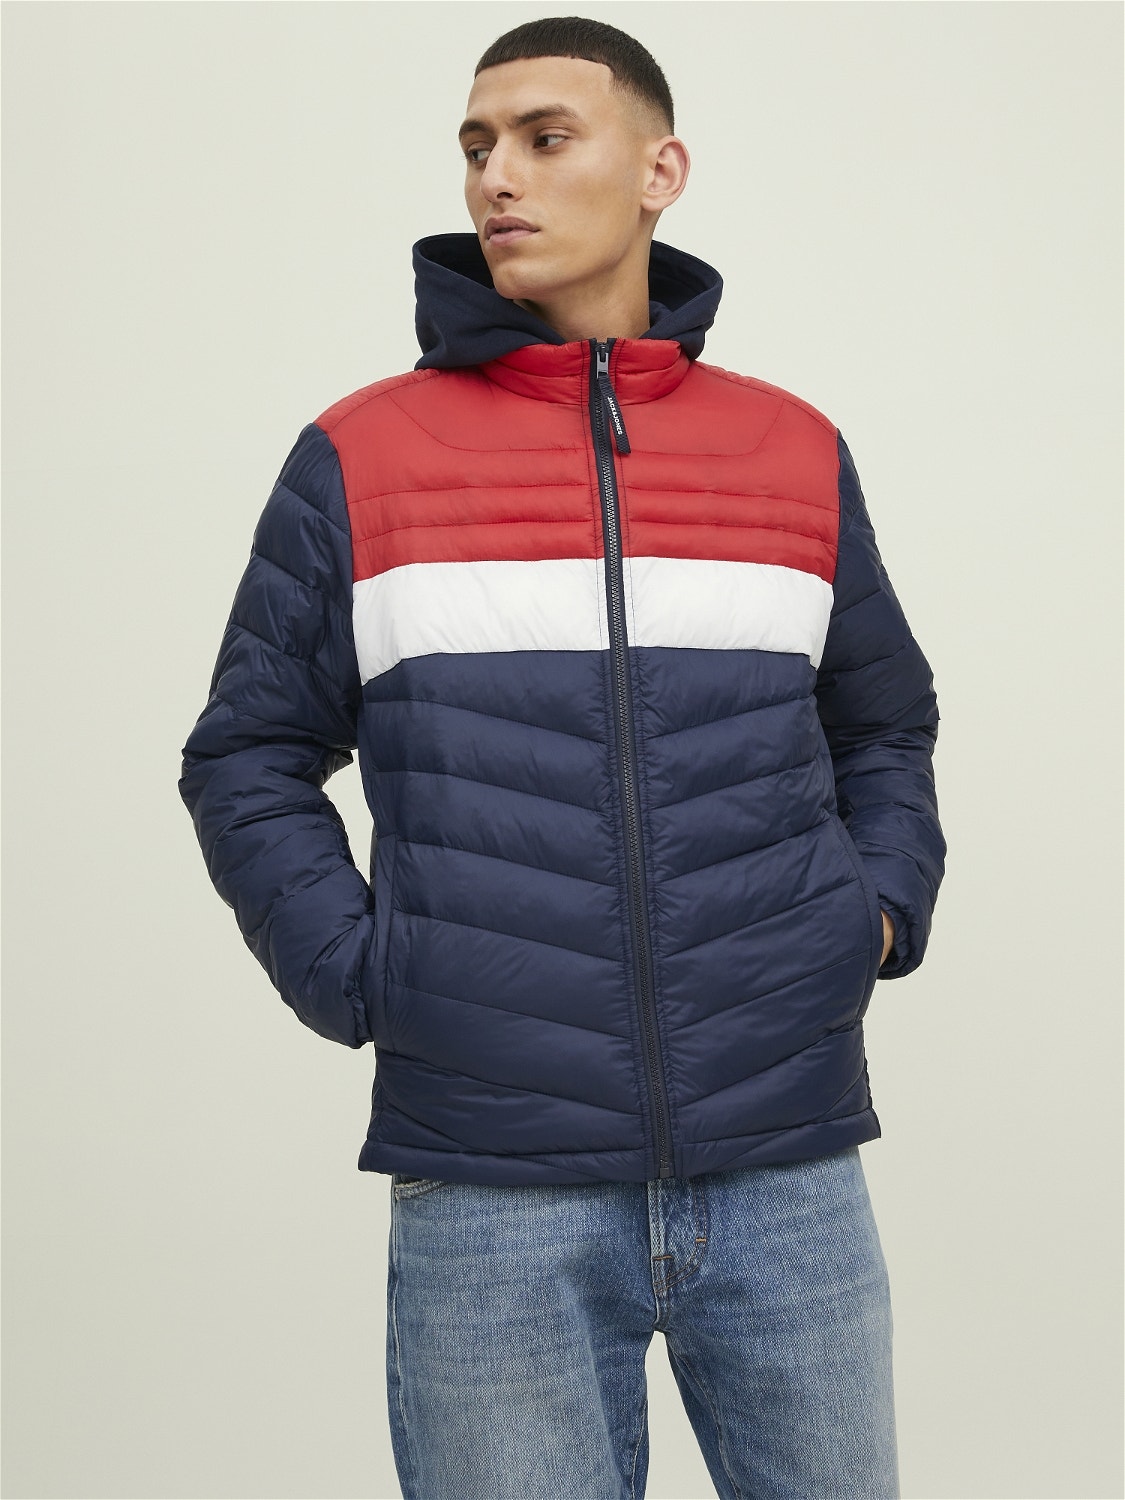 Navy Red Hooded Puffer Jacket